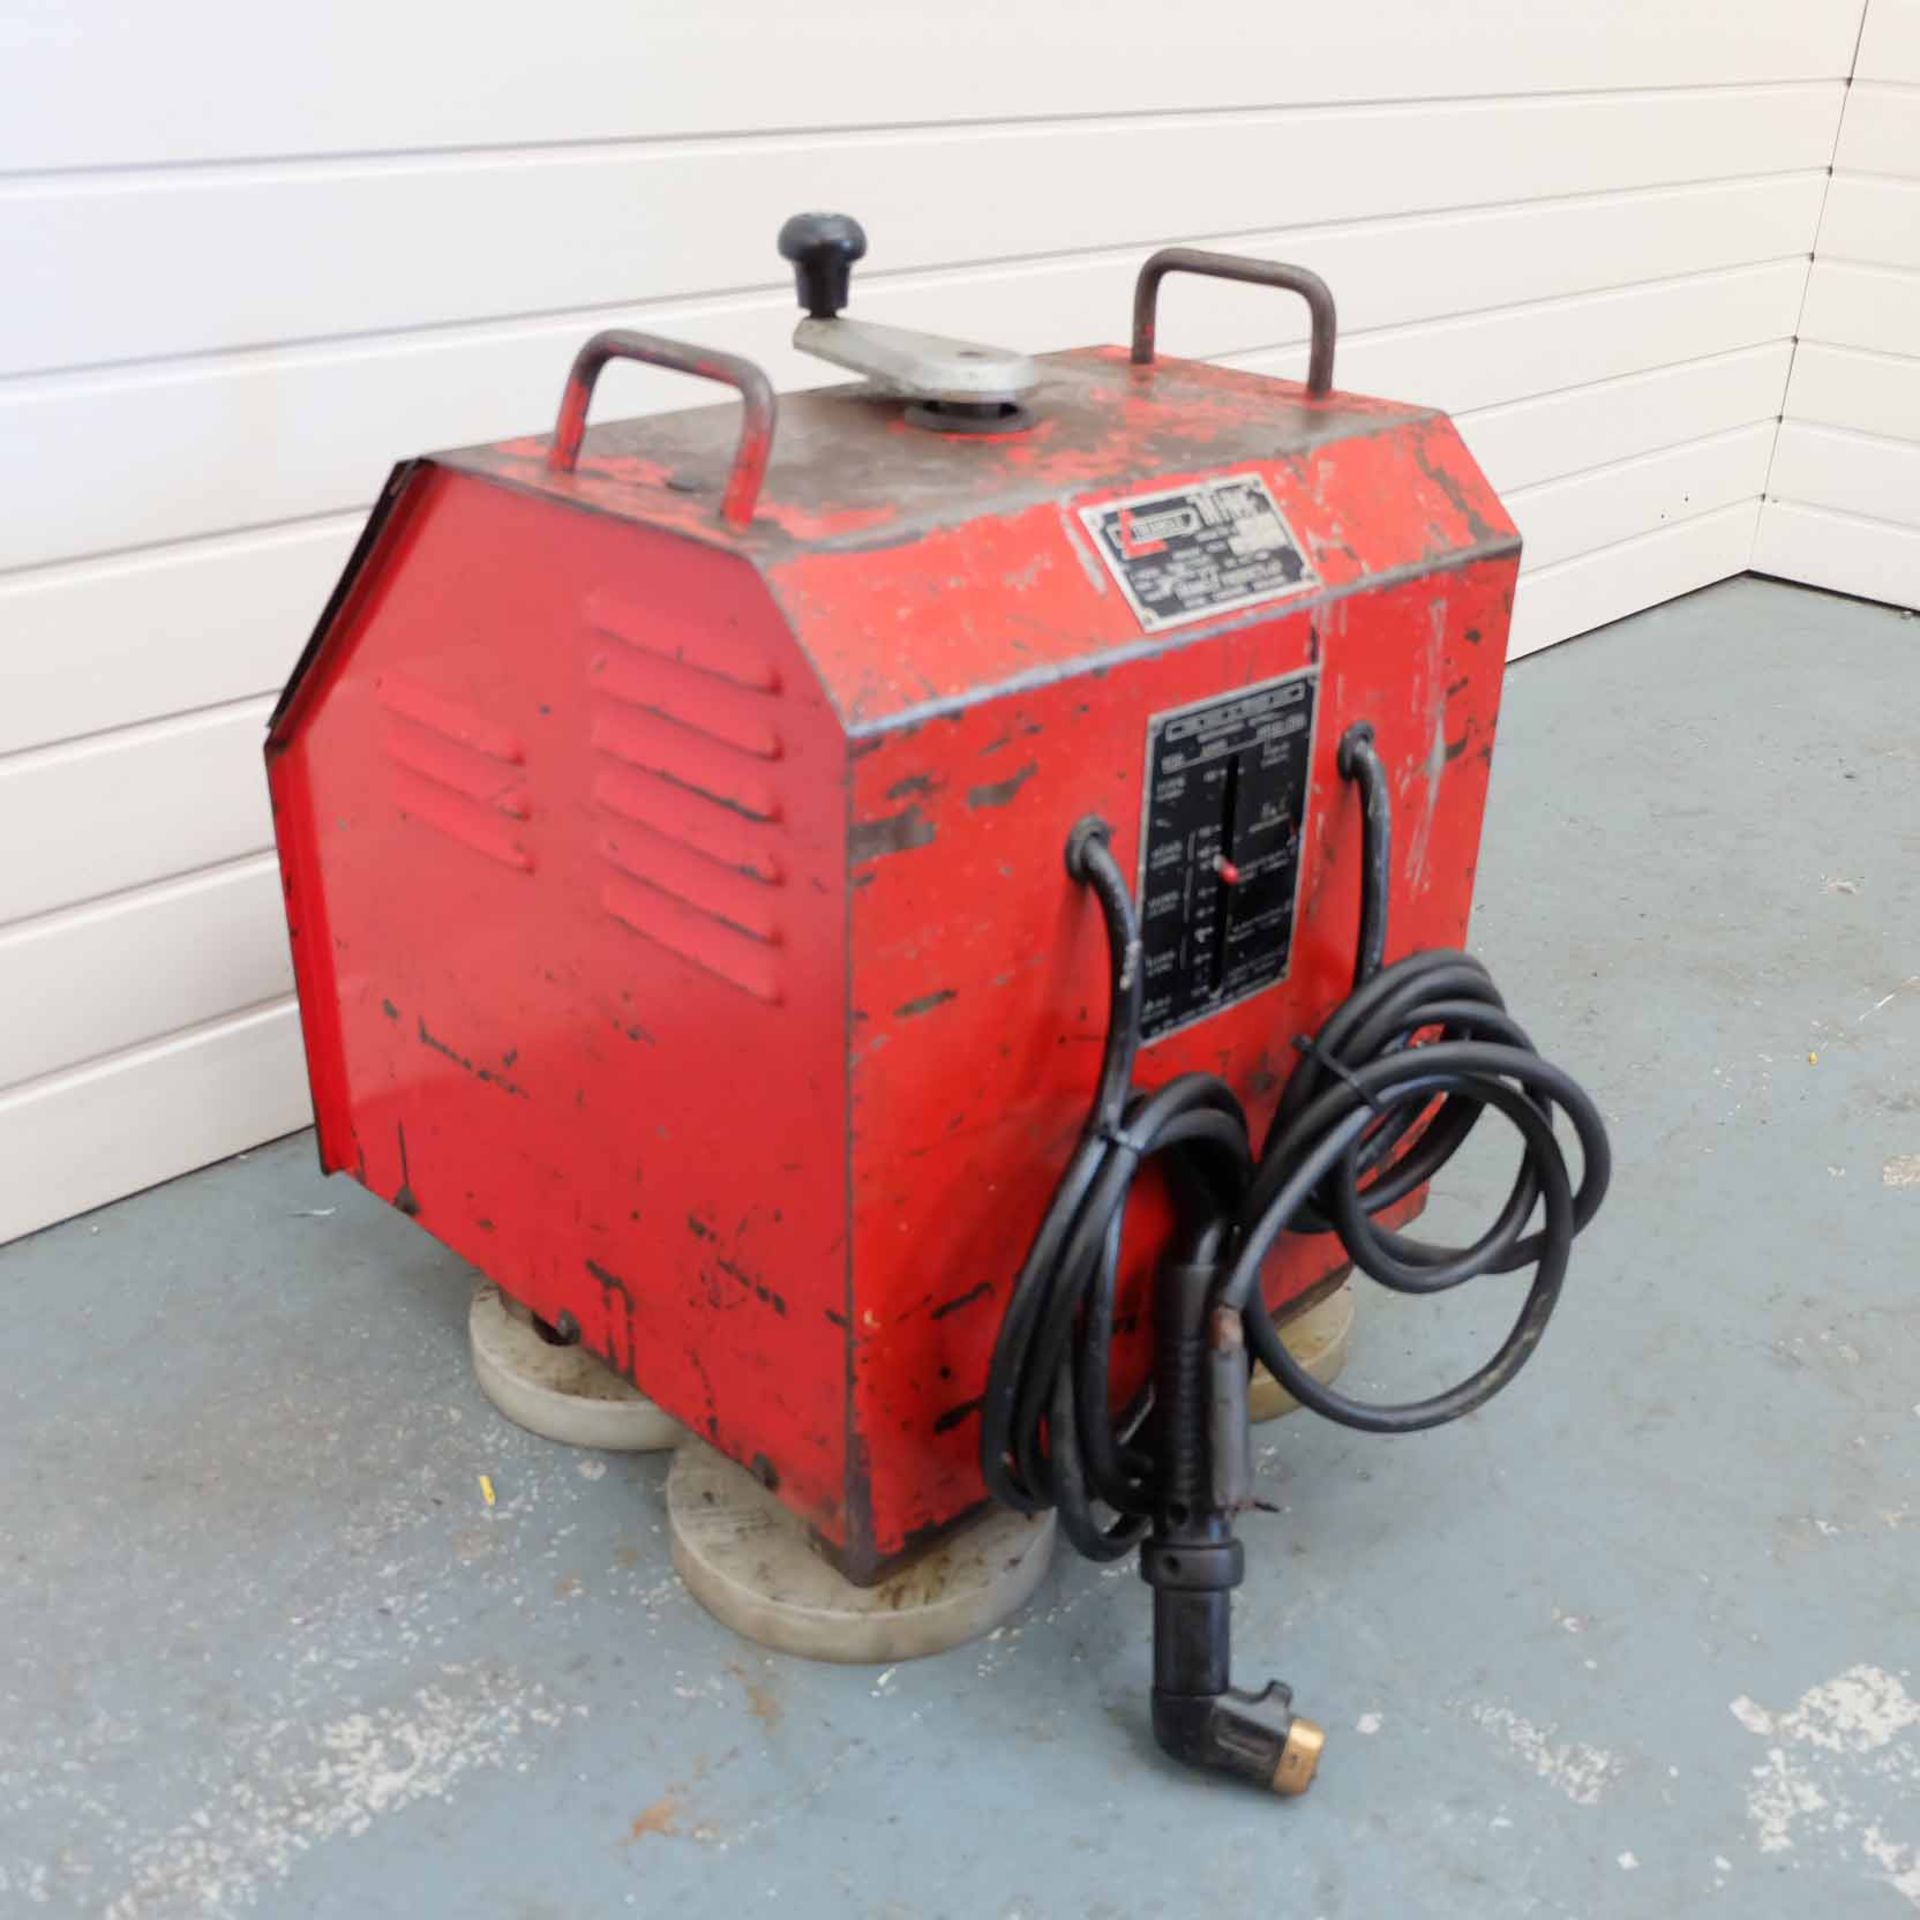 Triangle 'Minx' 1 Phase Stick Welder. Range 30 - 50Amps. Max Duty Cycle 3KVA. Primary Volts 200 - 48 - Image 4 of 7